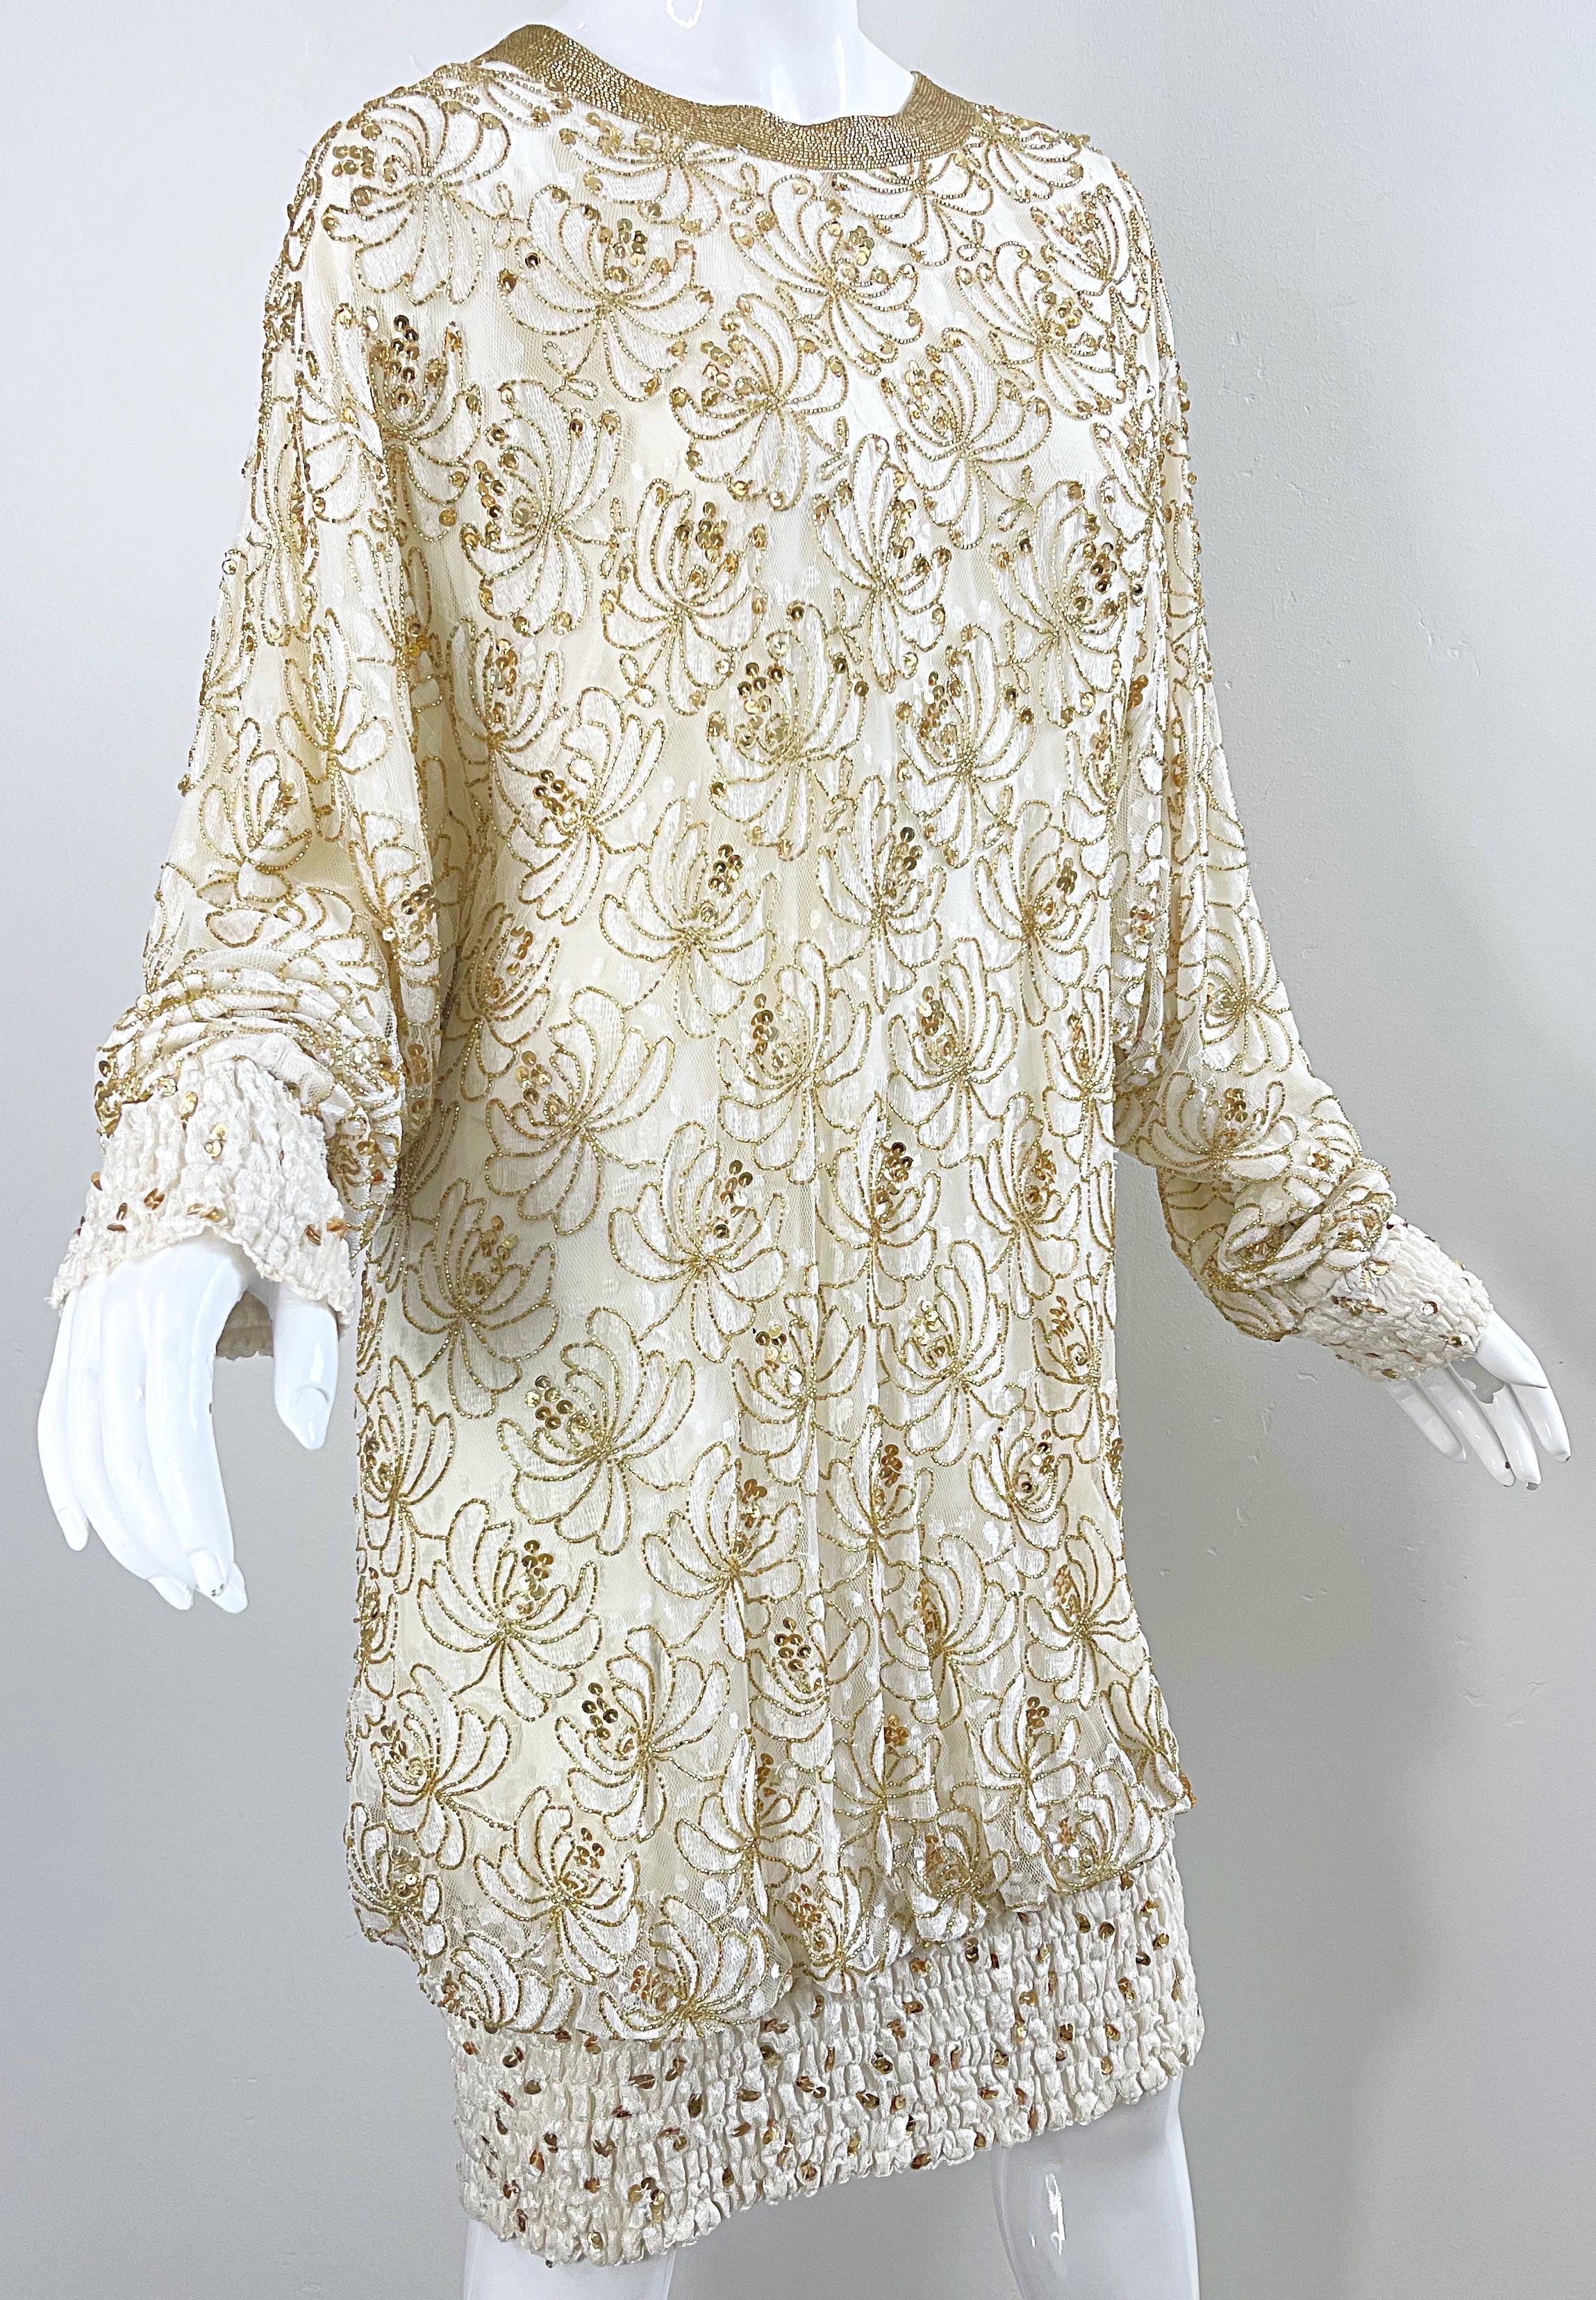 Lillie Rubin 1980s Ivory Off White + Gold Lace Sequin Beaded Vintage 80s Dress For Sale 4